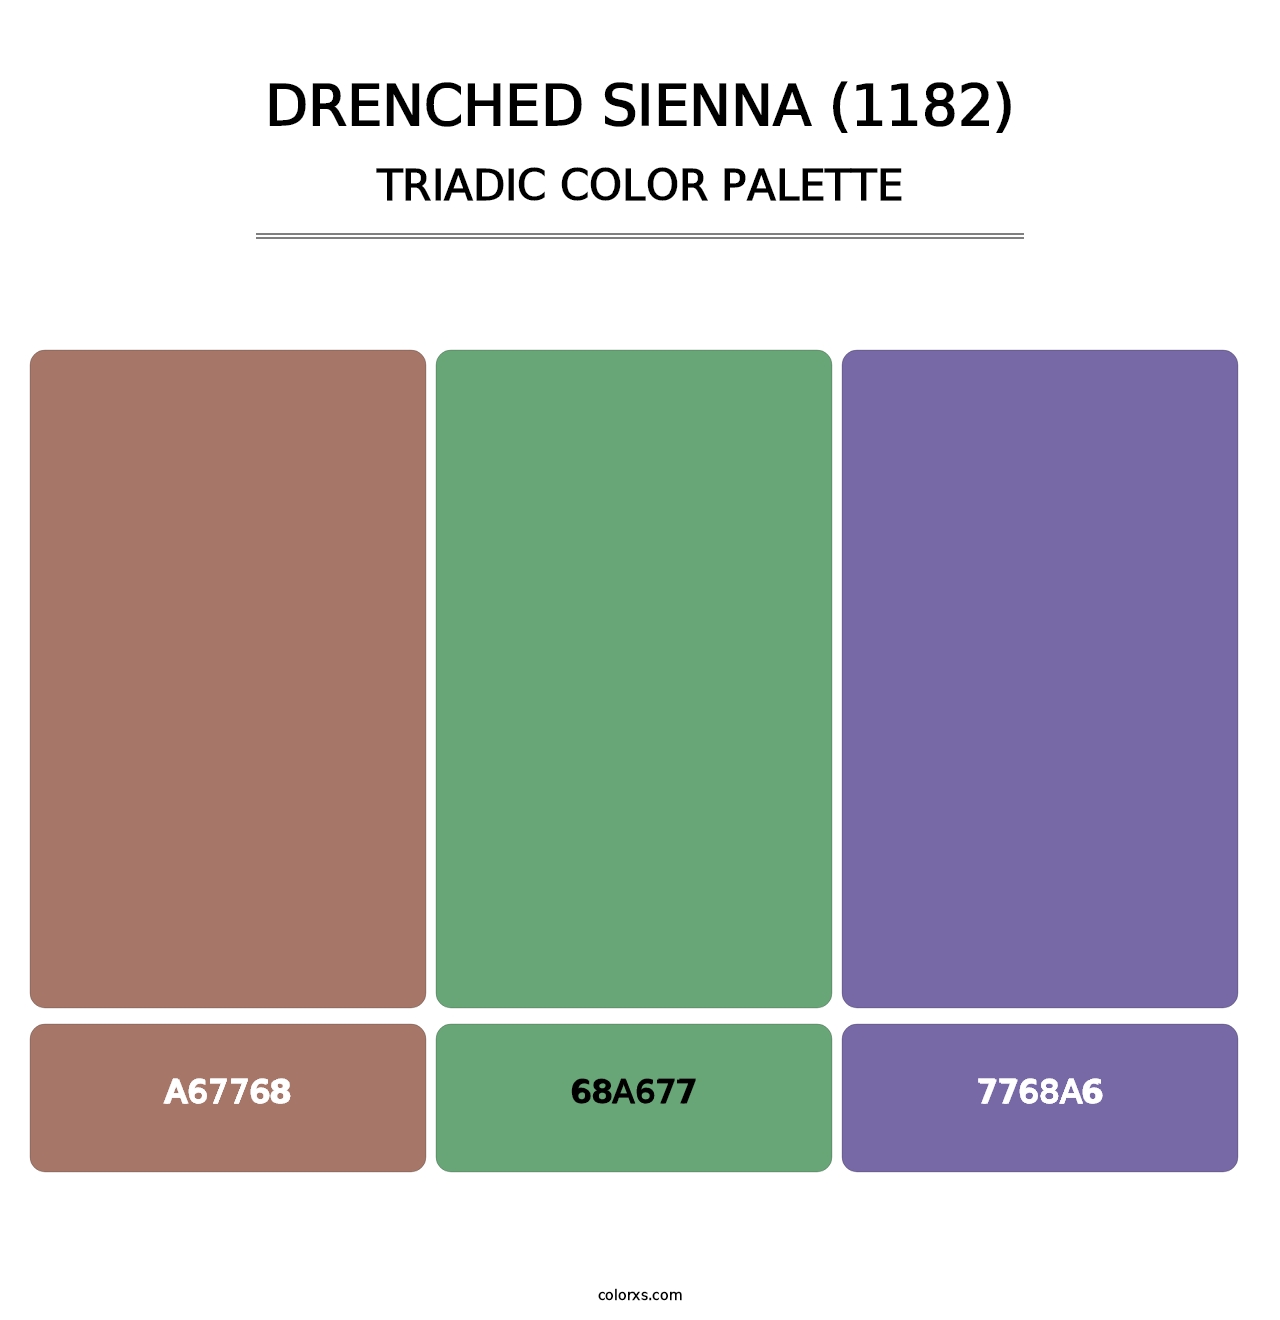 Drenched Sienna (1182) - Triadic Color Palette